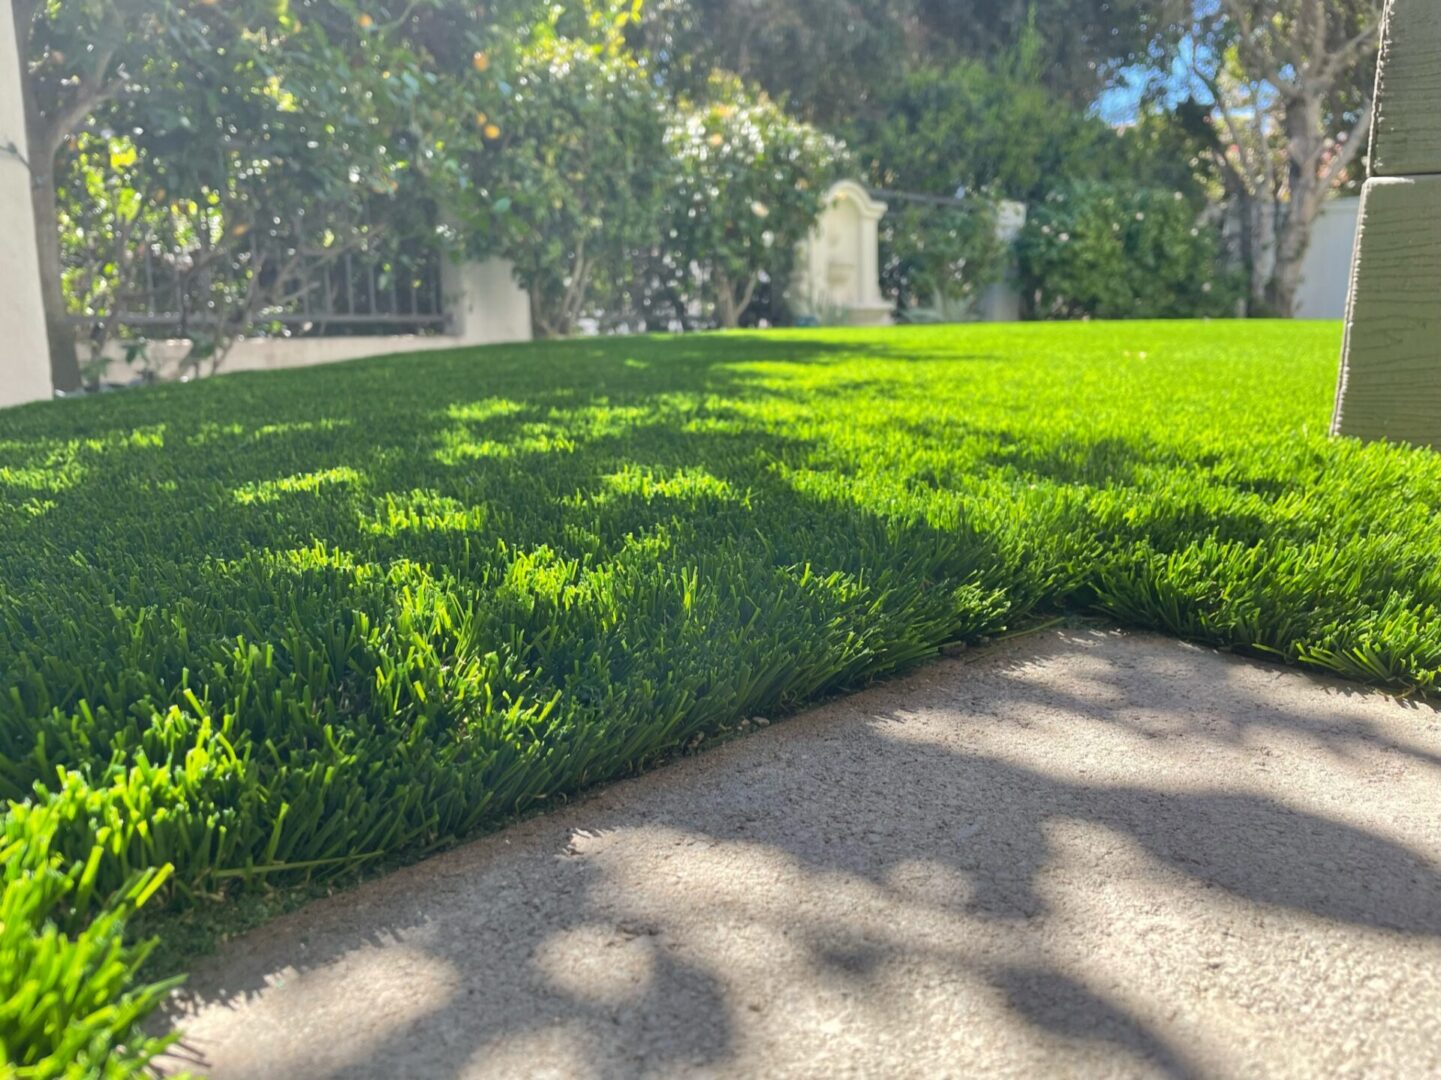 Trees Shadow on Green Grass Lawn